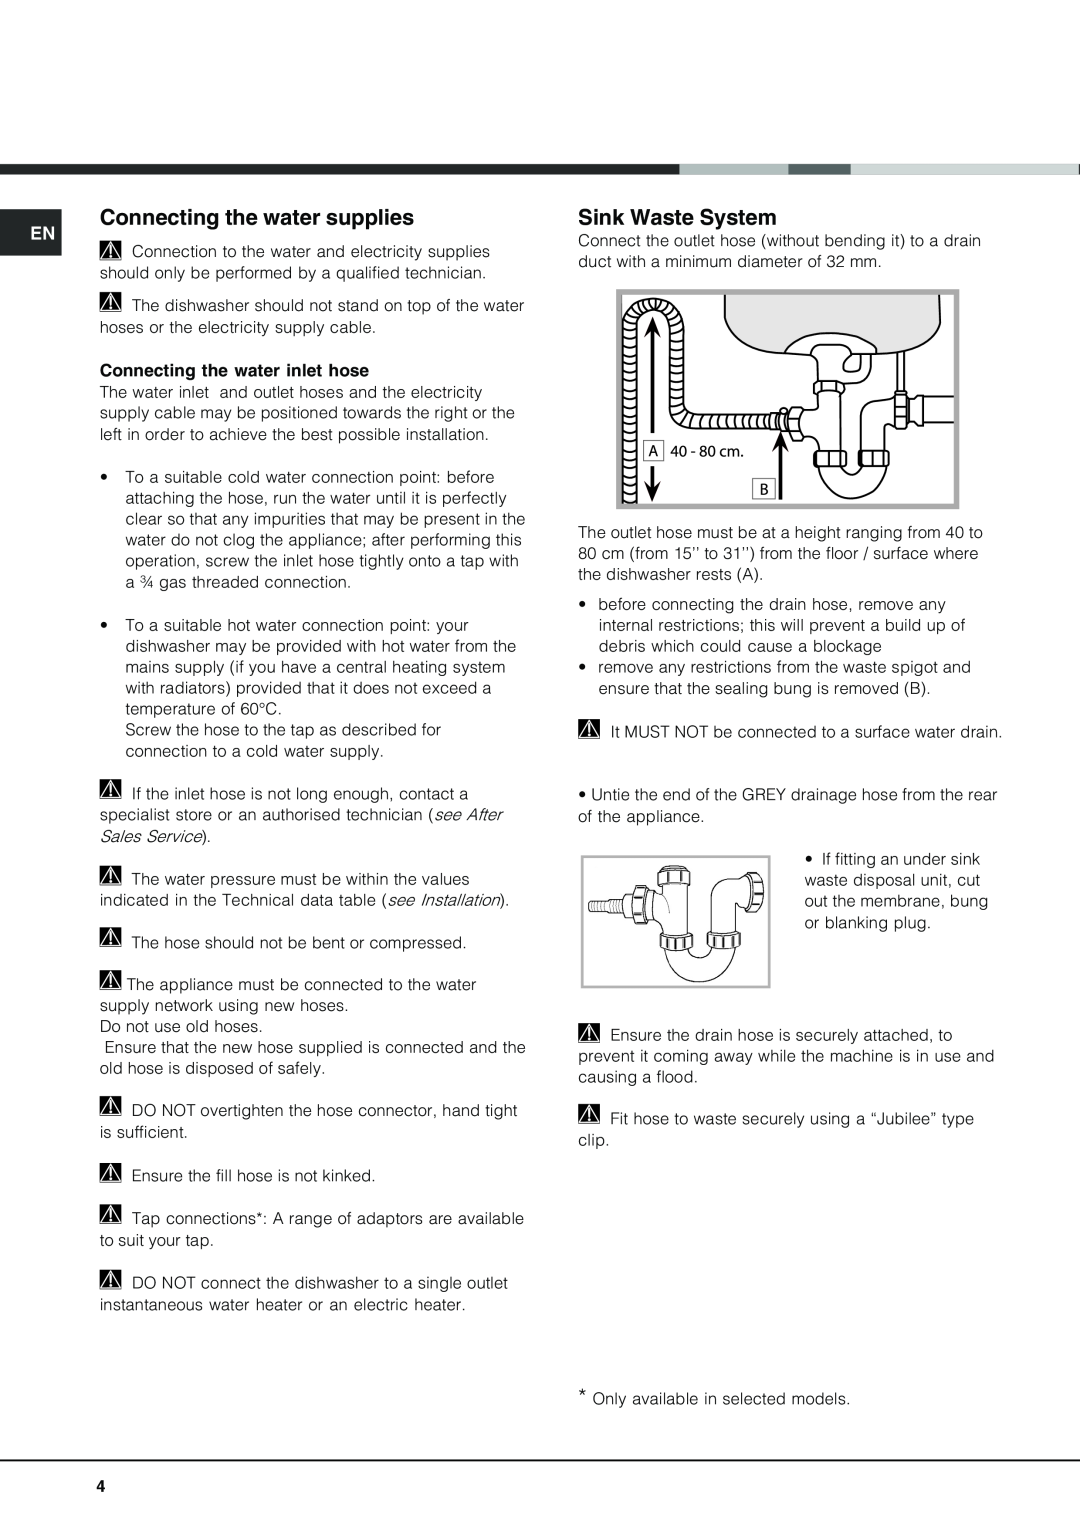 Hotpoint FDUD 4812 manual Connecting the water supplies, Sink Waste System, Connecting the water inlet hose 